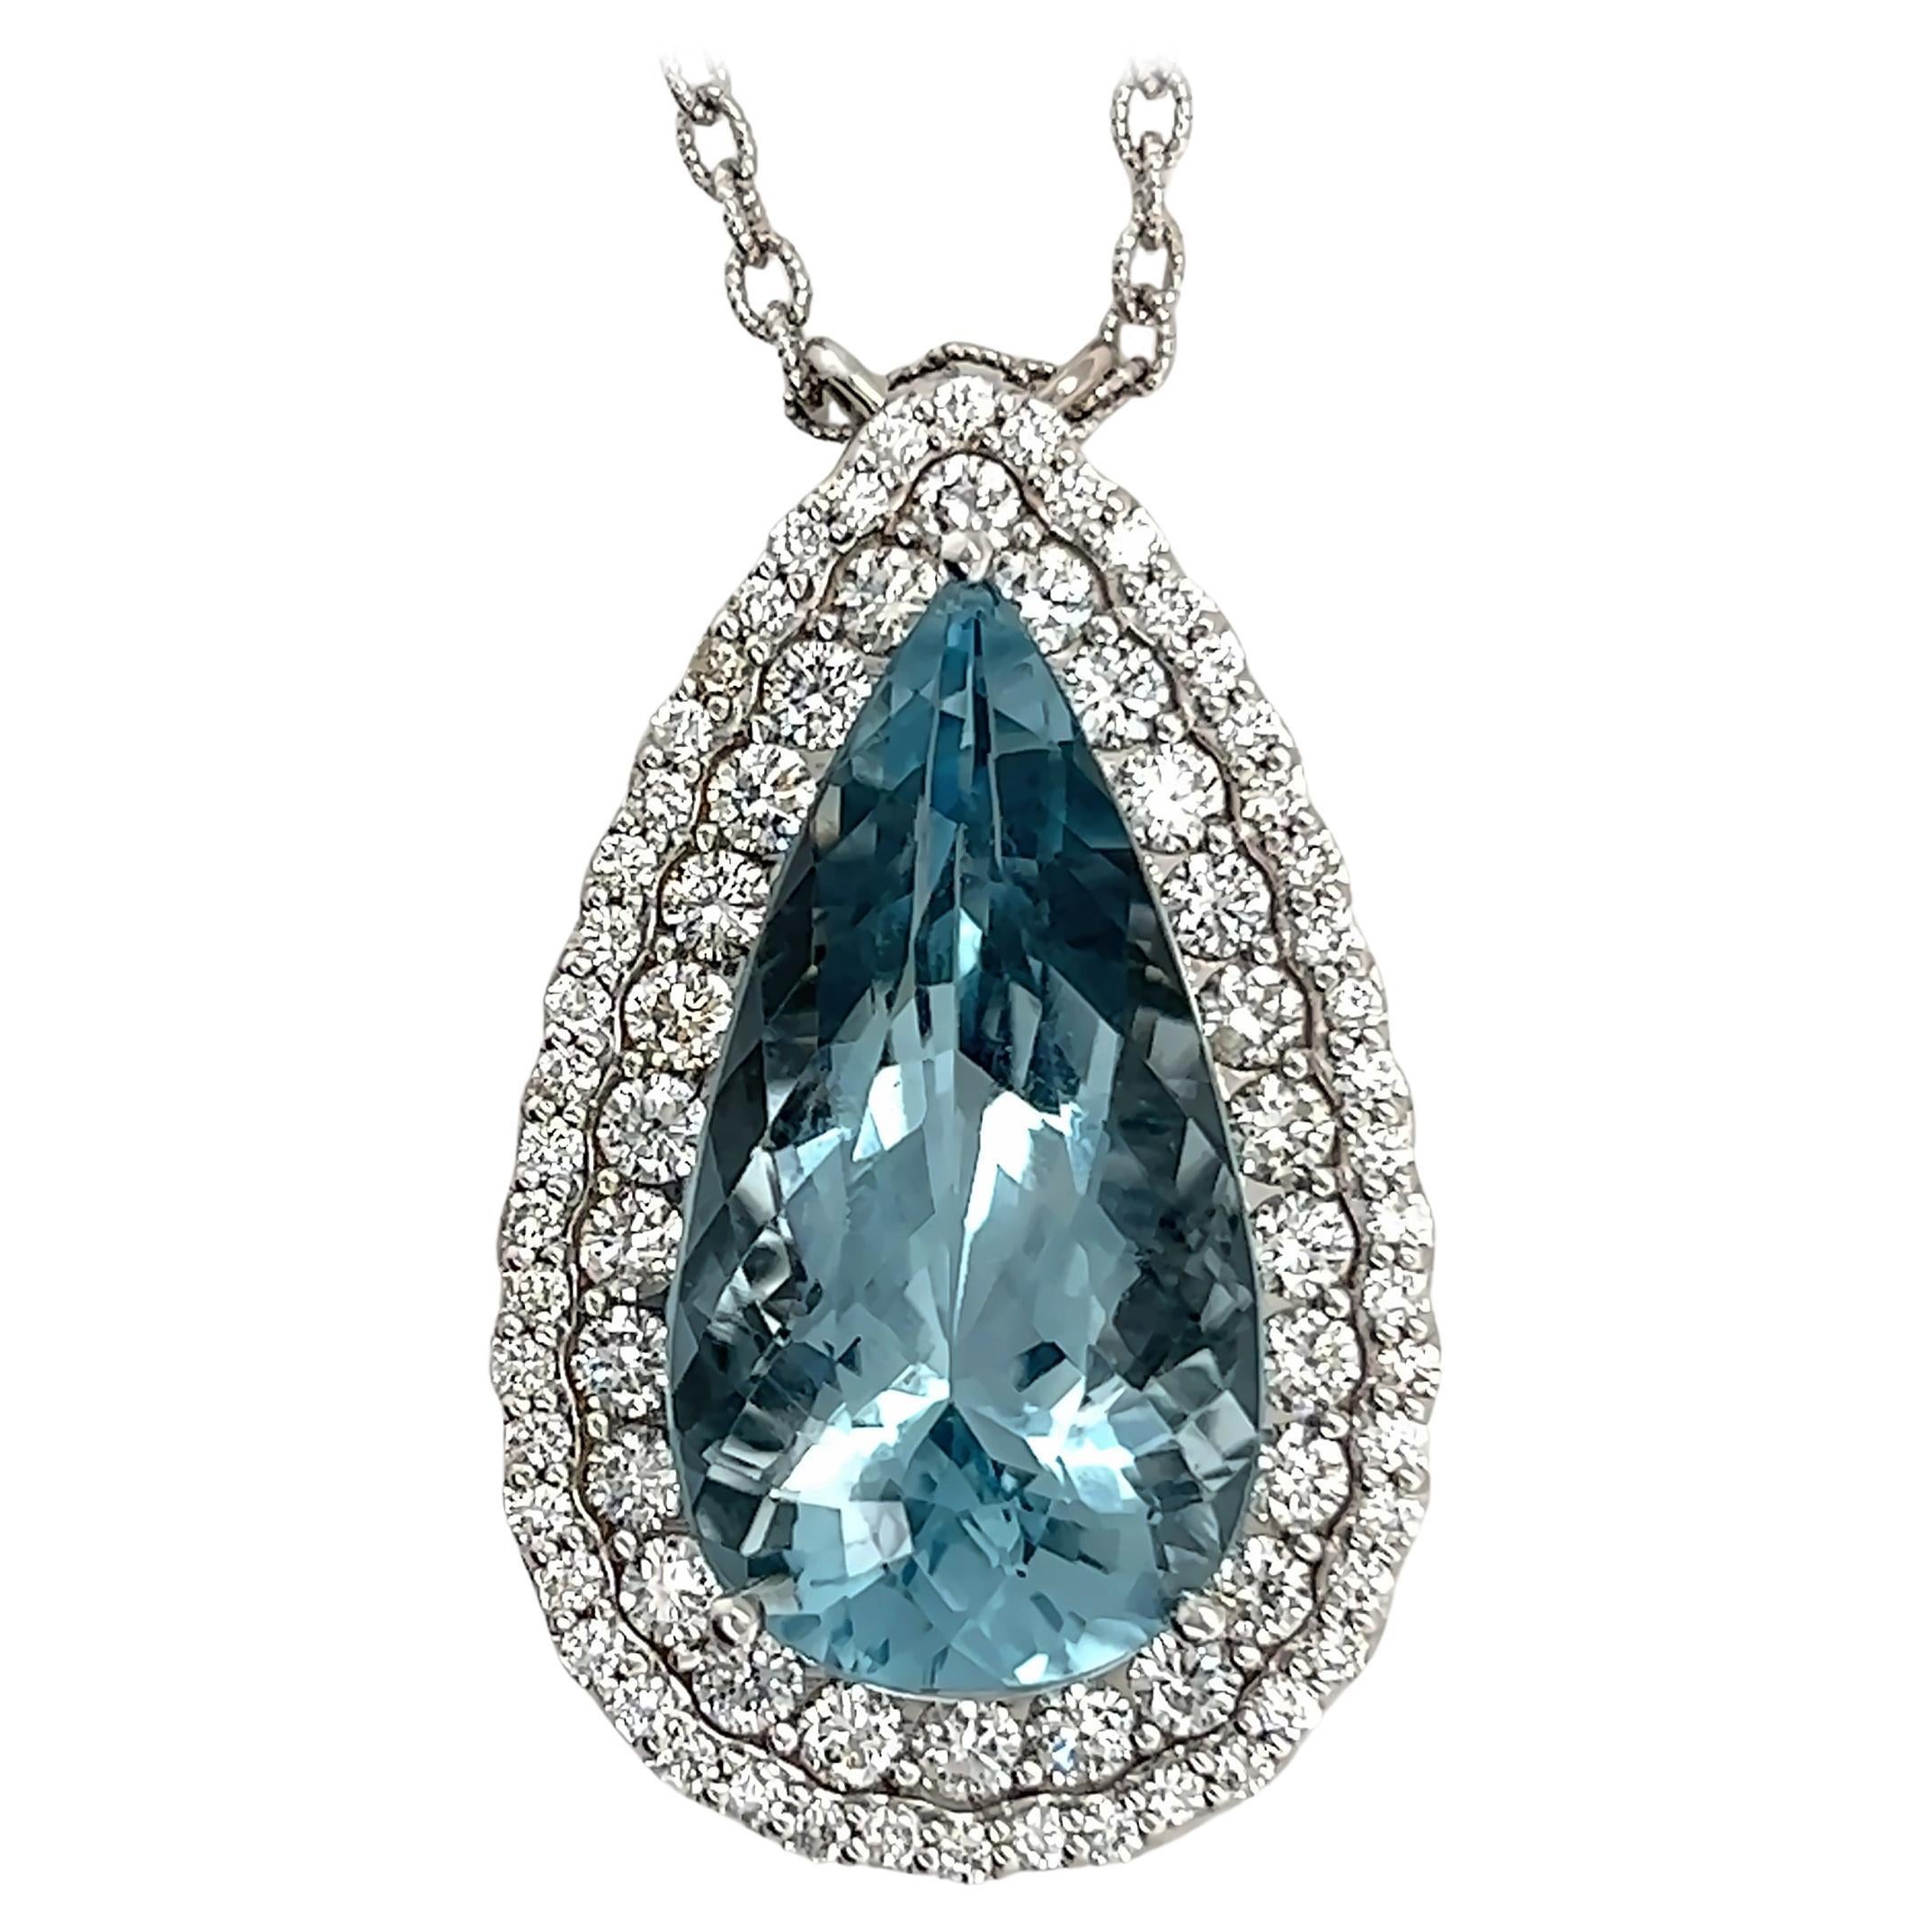 Natural Aquamarine Diamond Pendant Gold Chain 19.9 TCW Certified For Sale